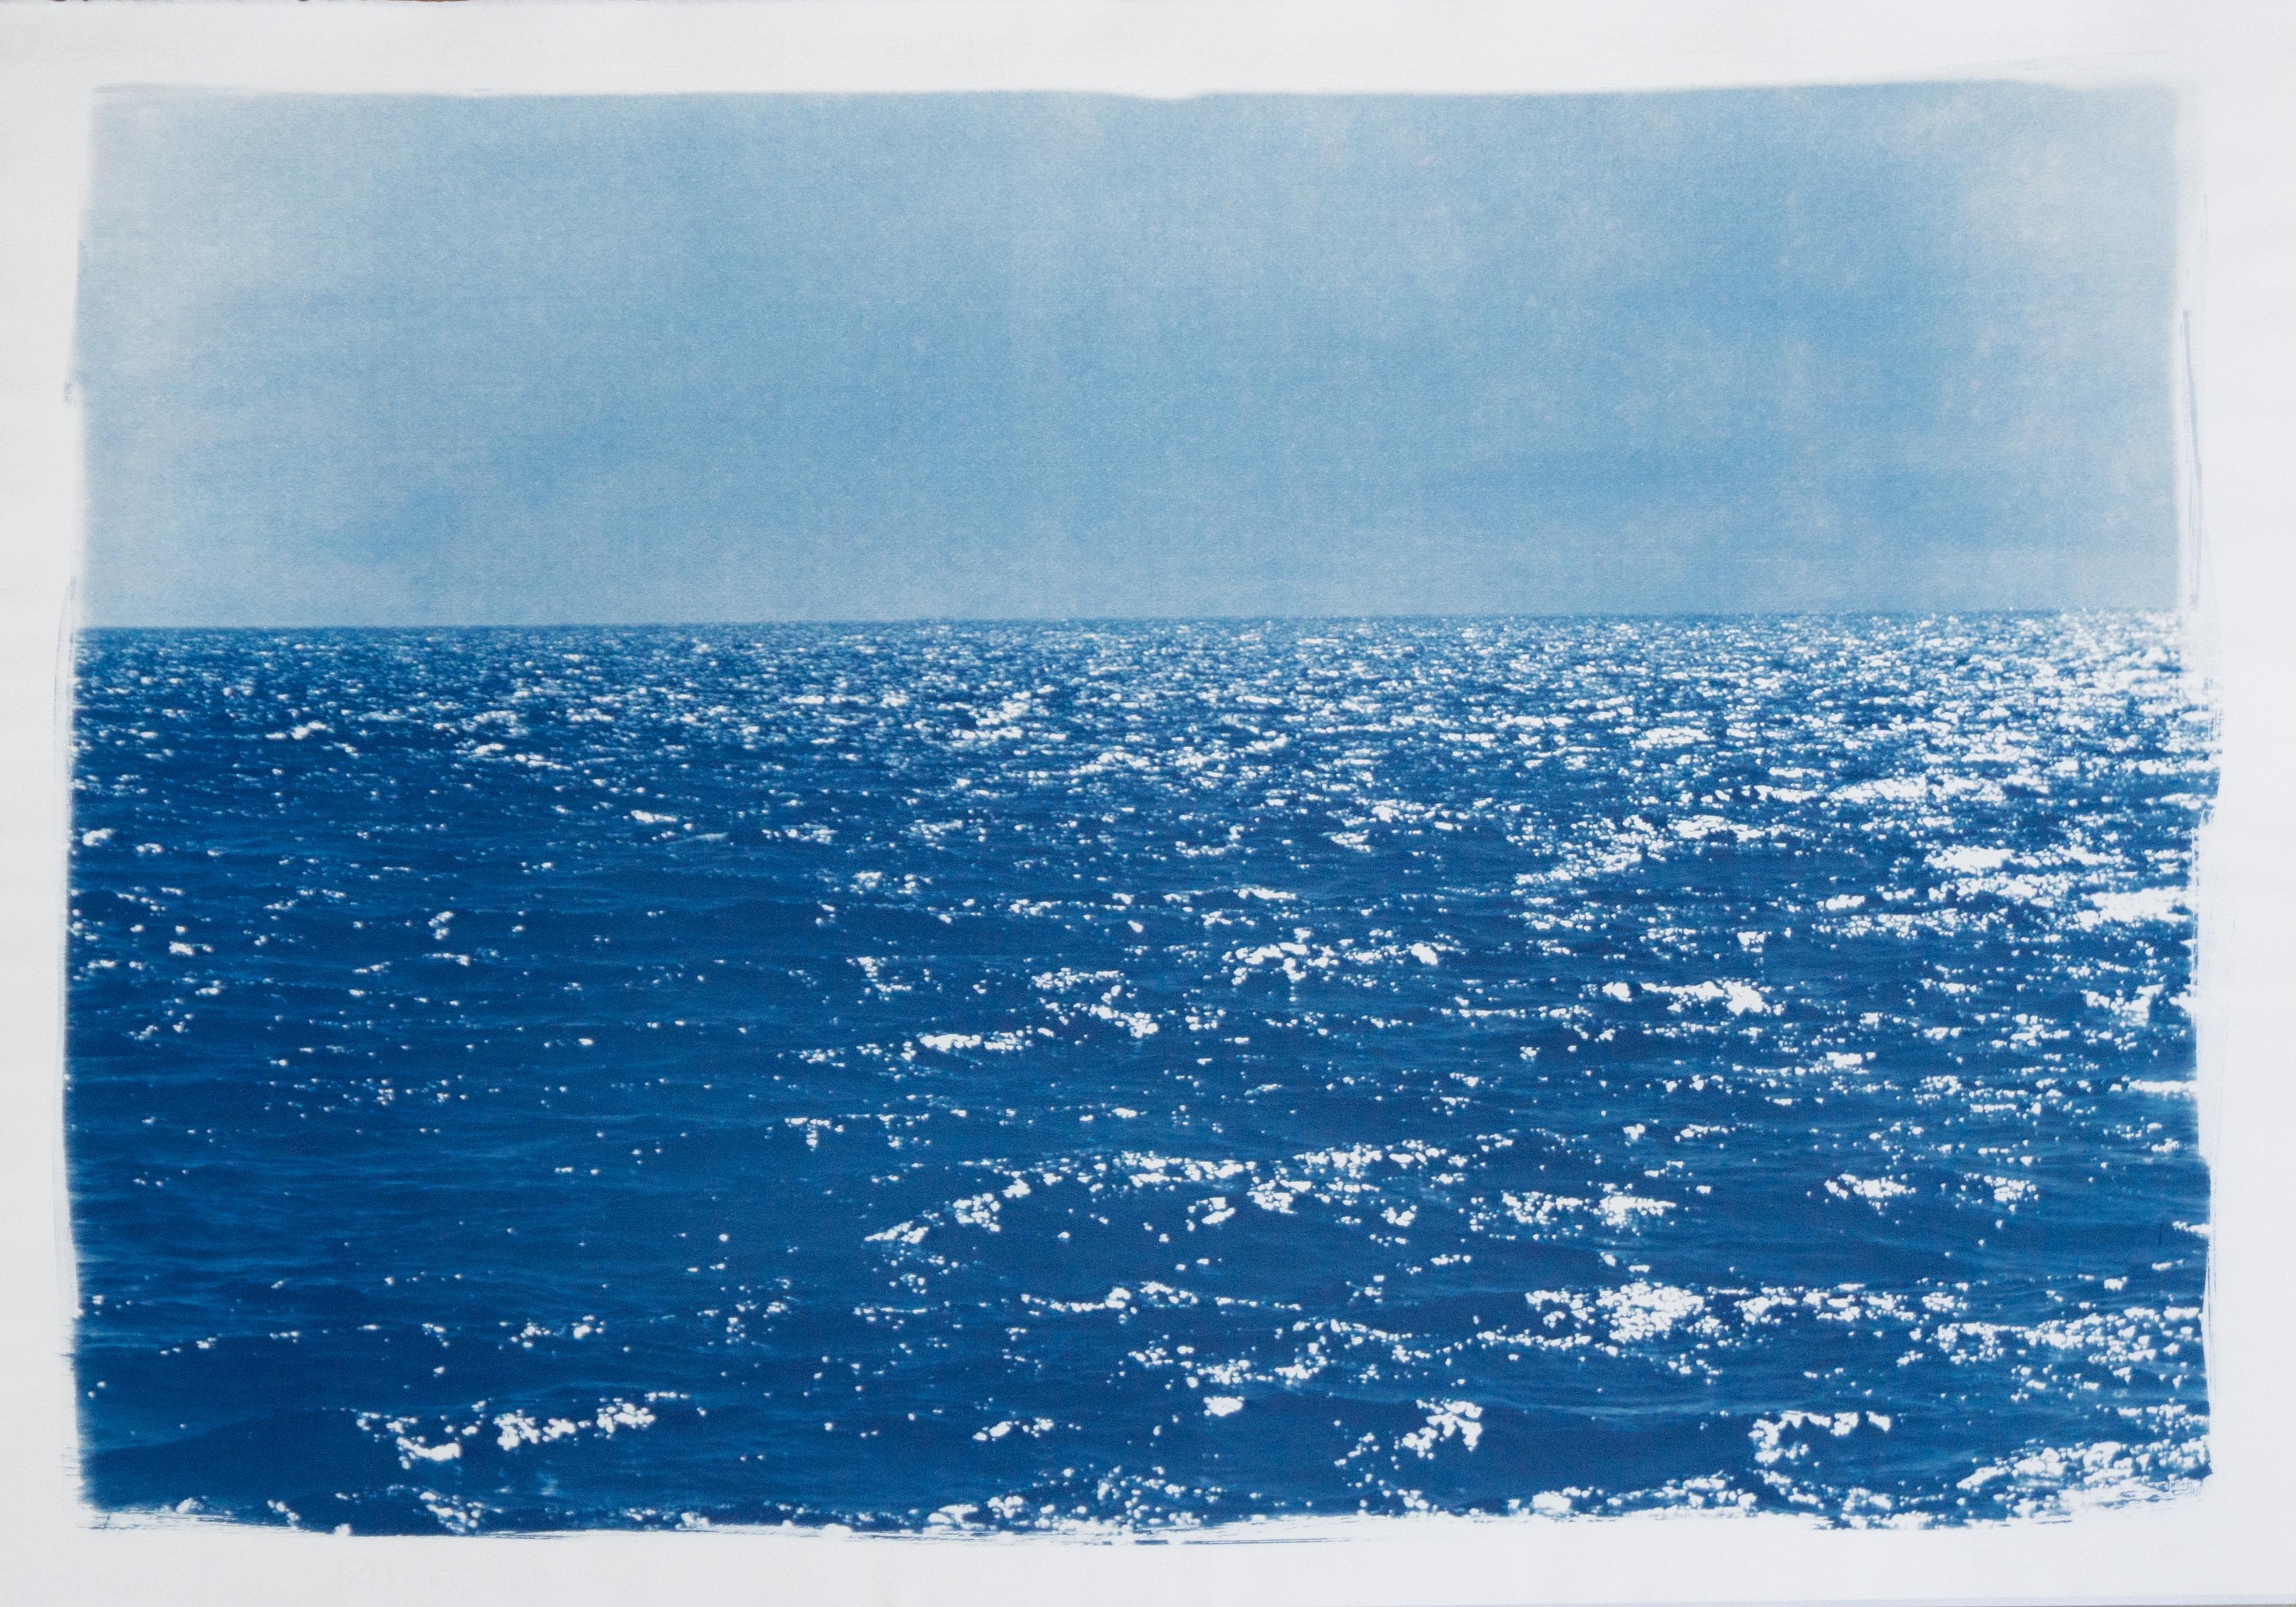 Coastal Blue Cyanotype of Day Time Seascape, Cold Waves, Nautical Painting Shore